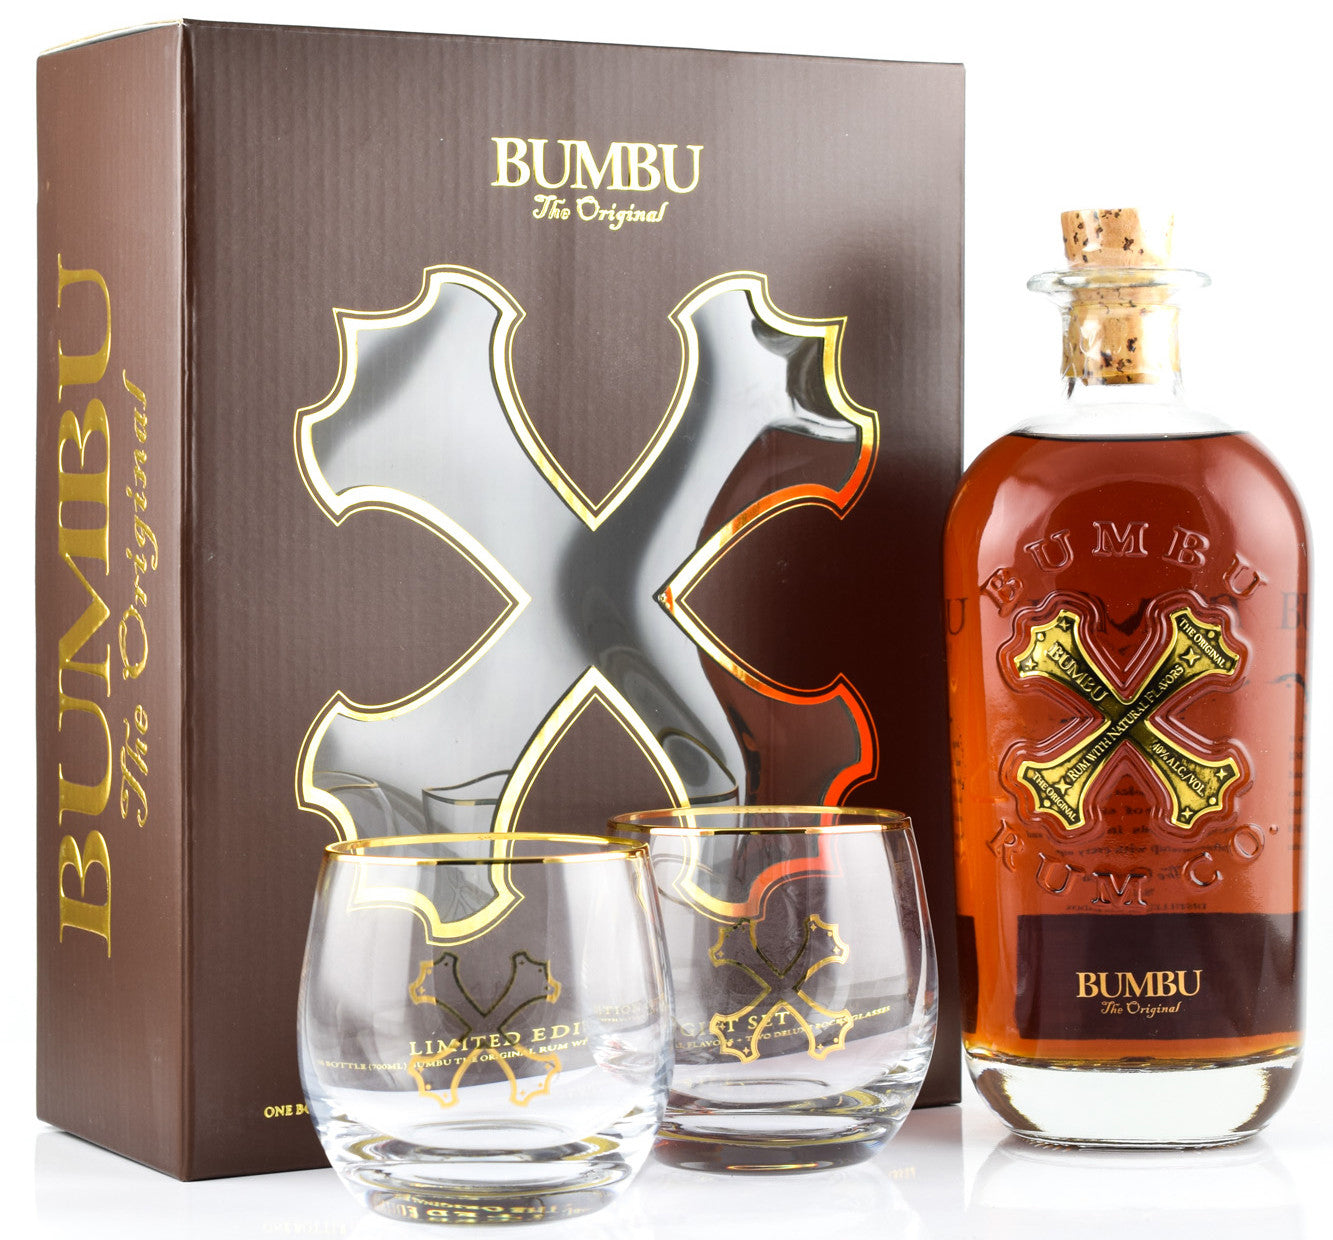 Bumbu Limited Edition Gift Set delivery in Los Angeles